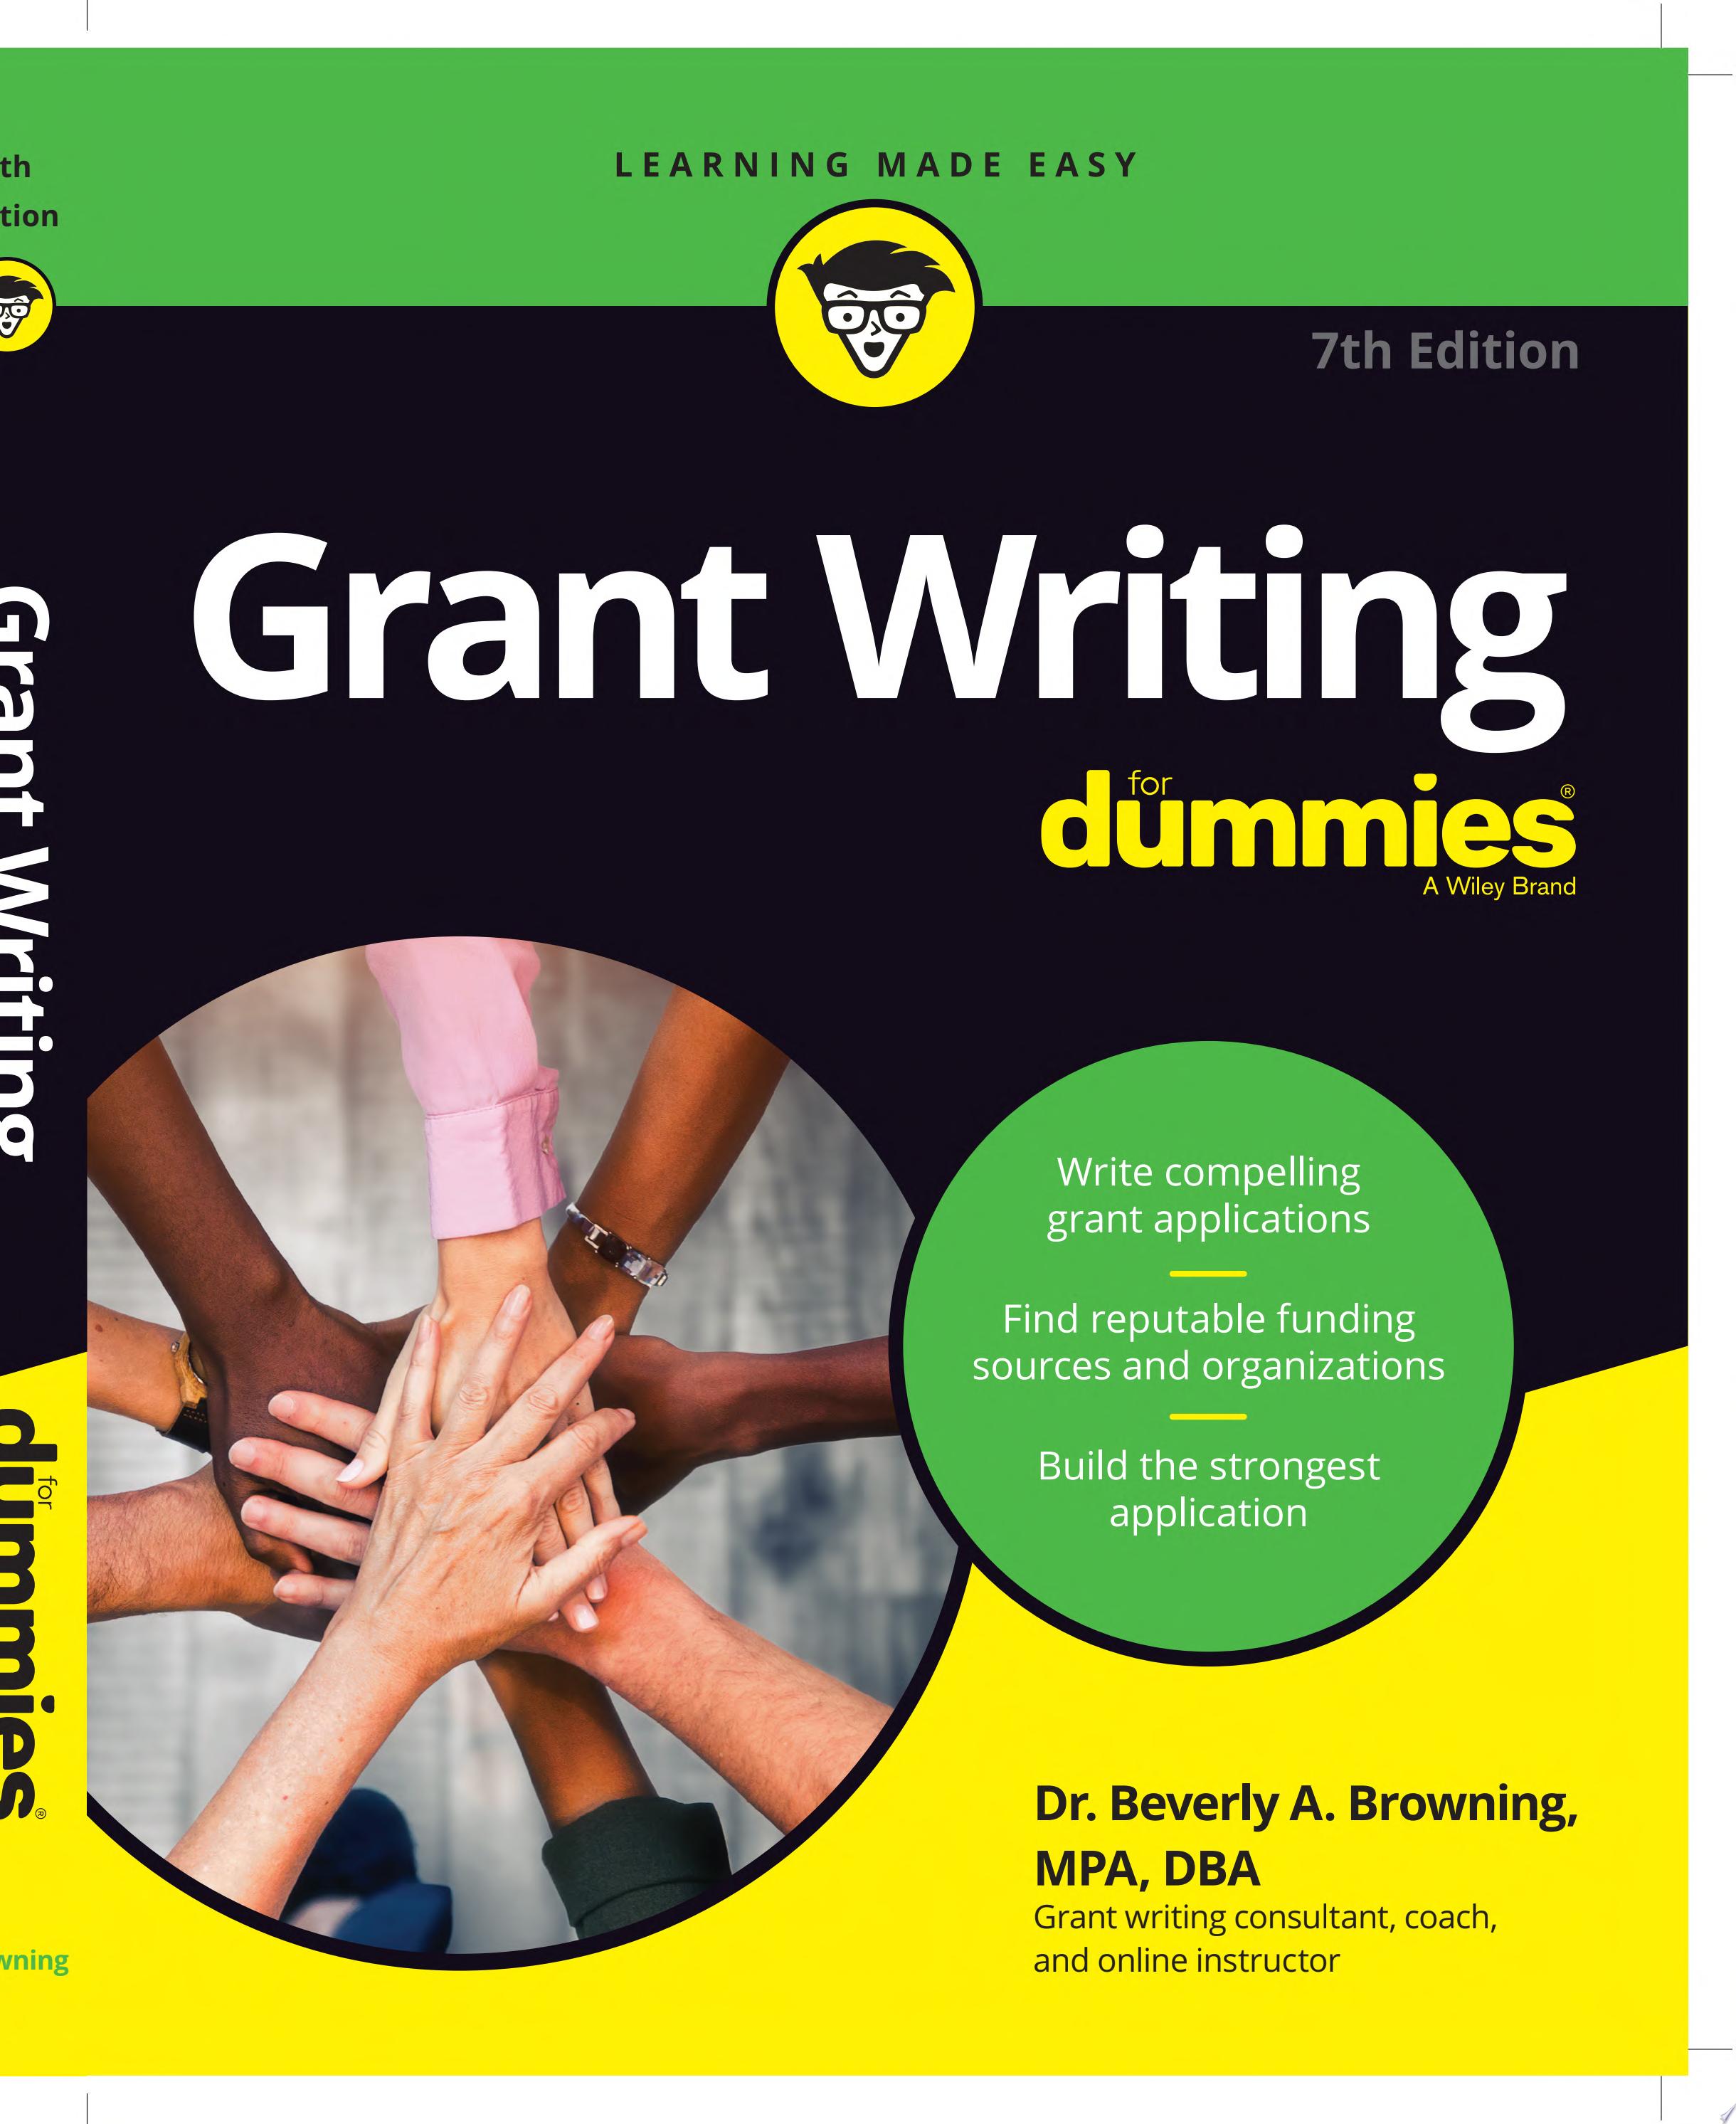 Image for "Grant Writing For Dummies"